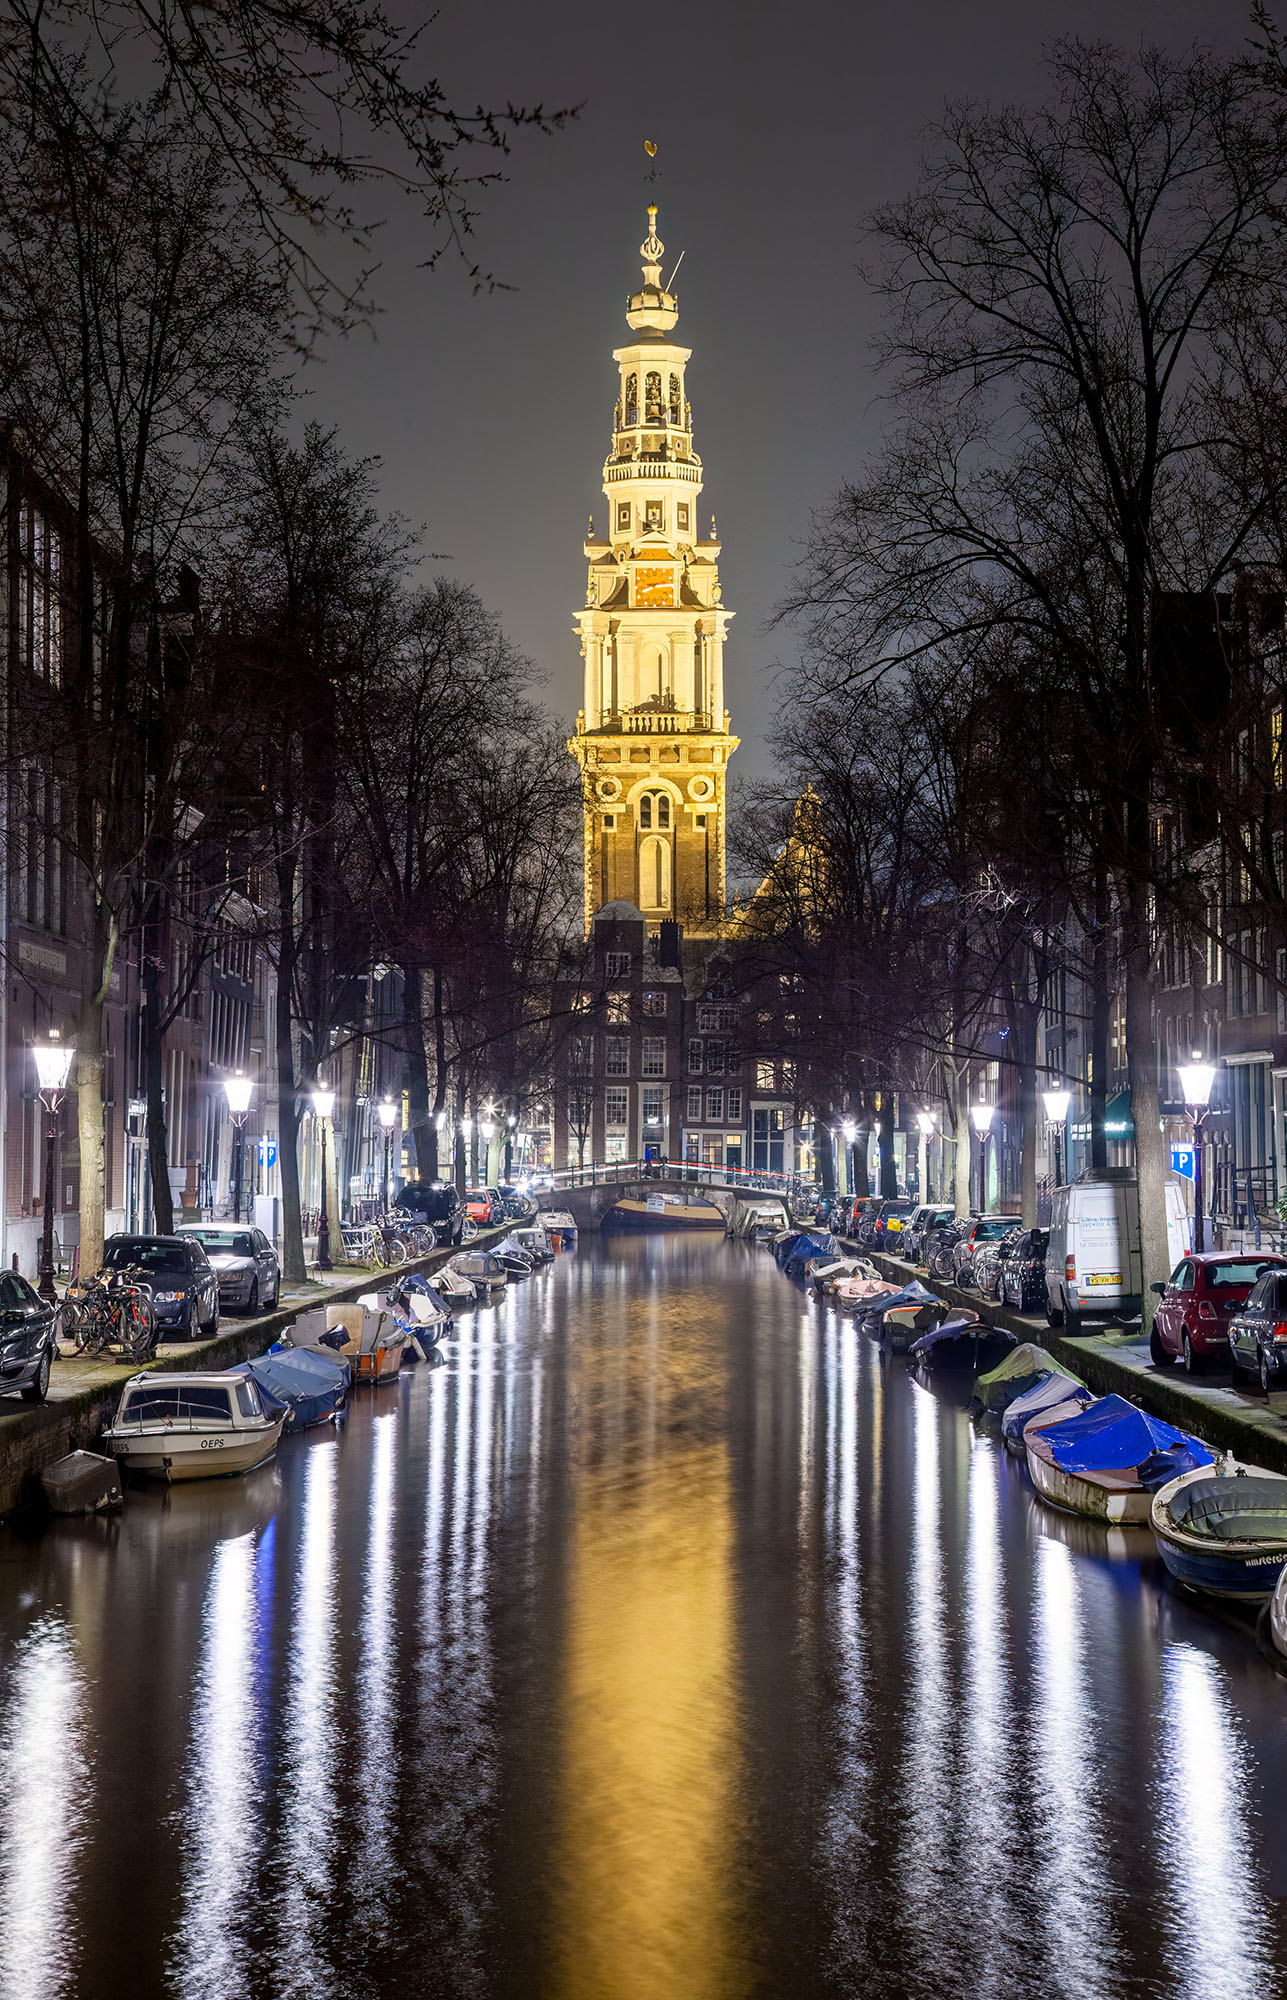 On a tranquil night in Amsterdam, I set my lens to capture the enchanting view of a canal stretching before me. The focal point...